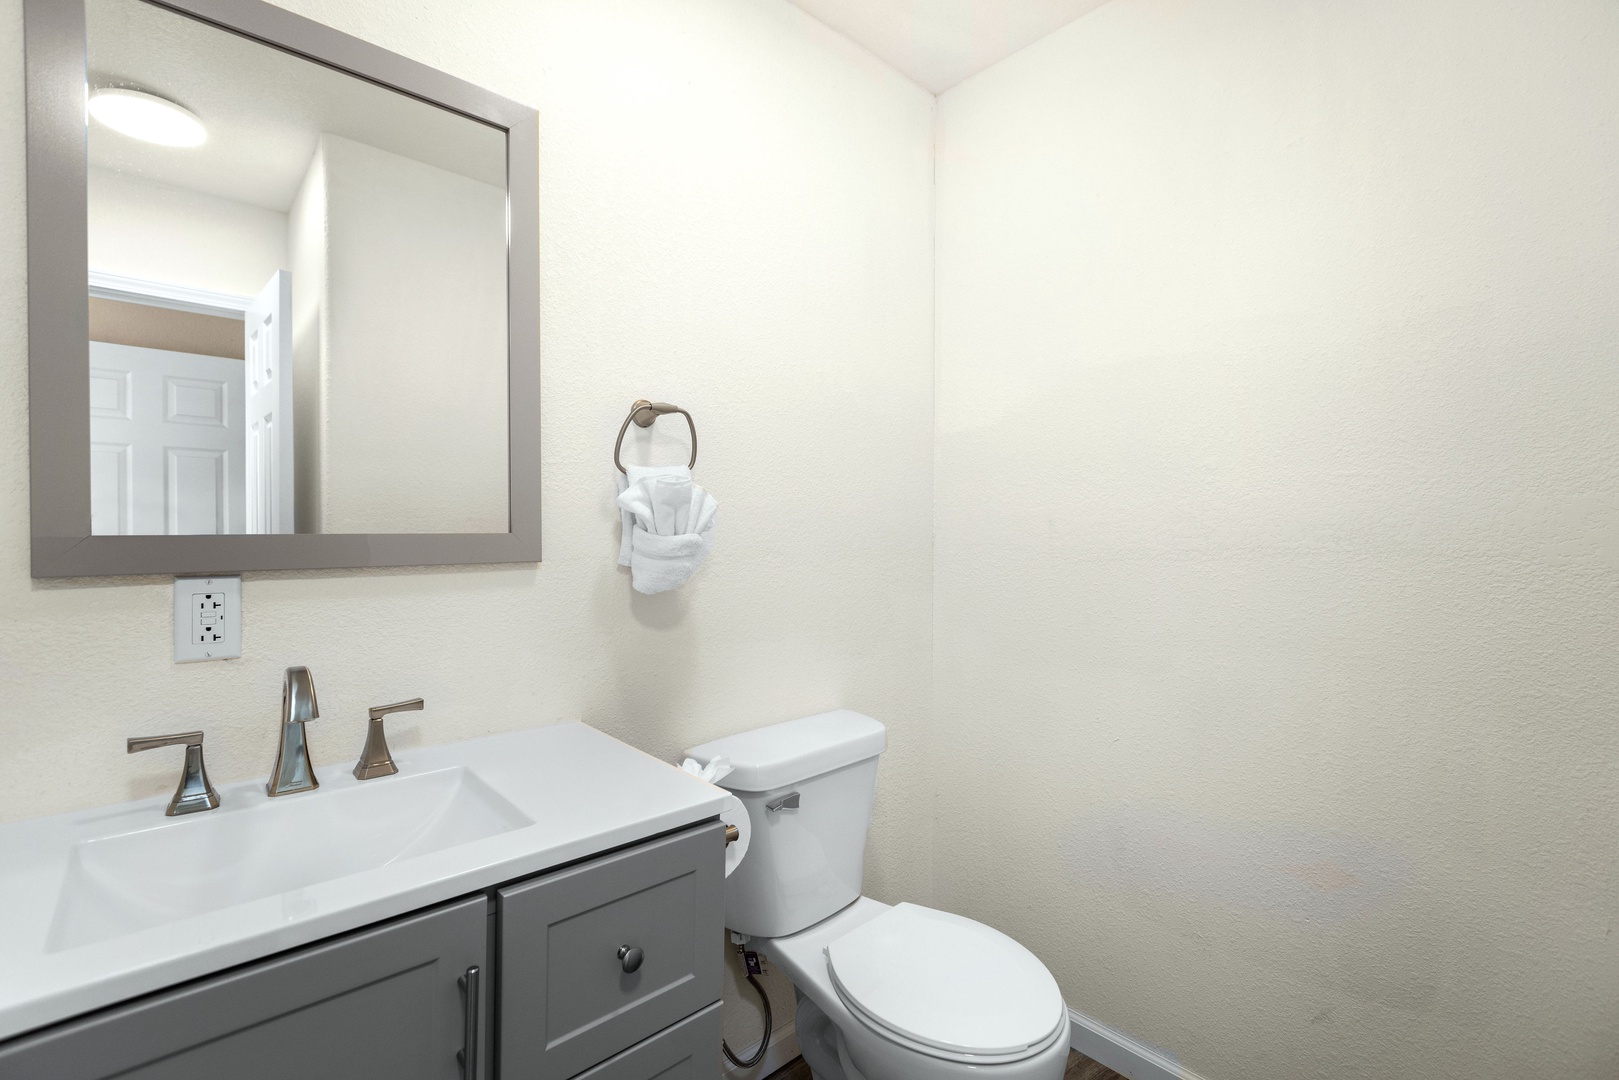 This full bathroom includes a chic single vanity & walk-in shower